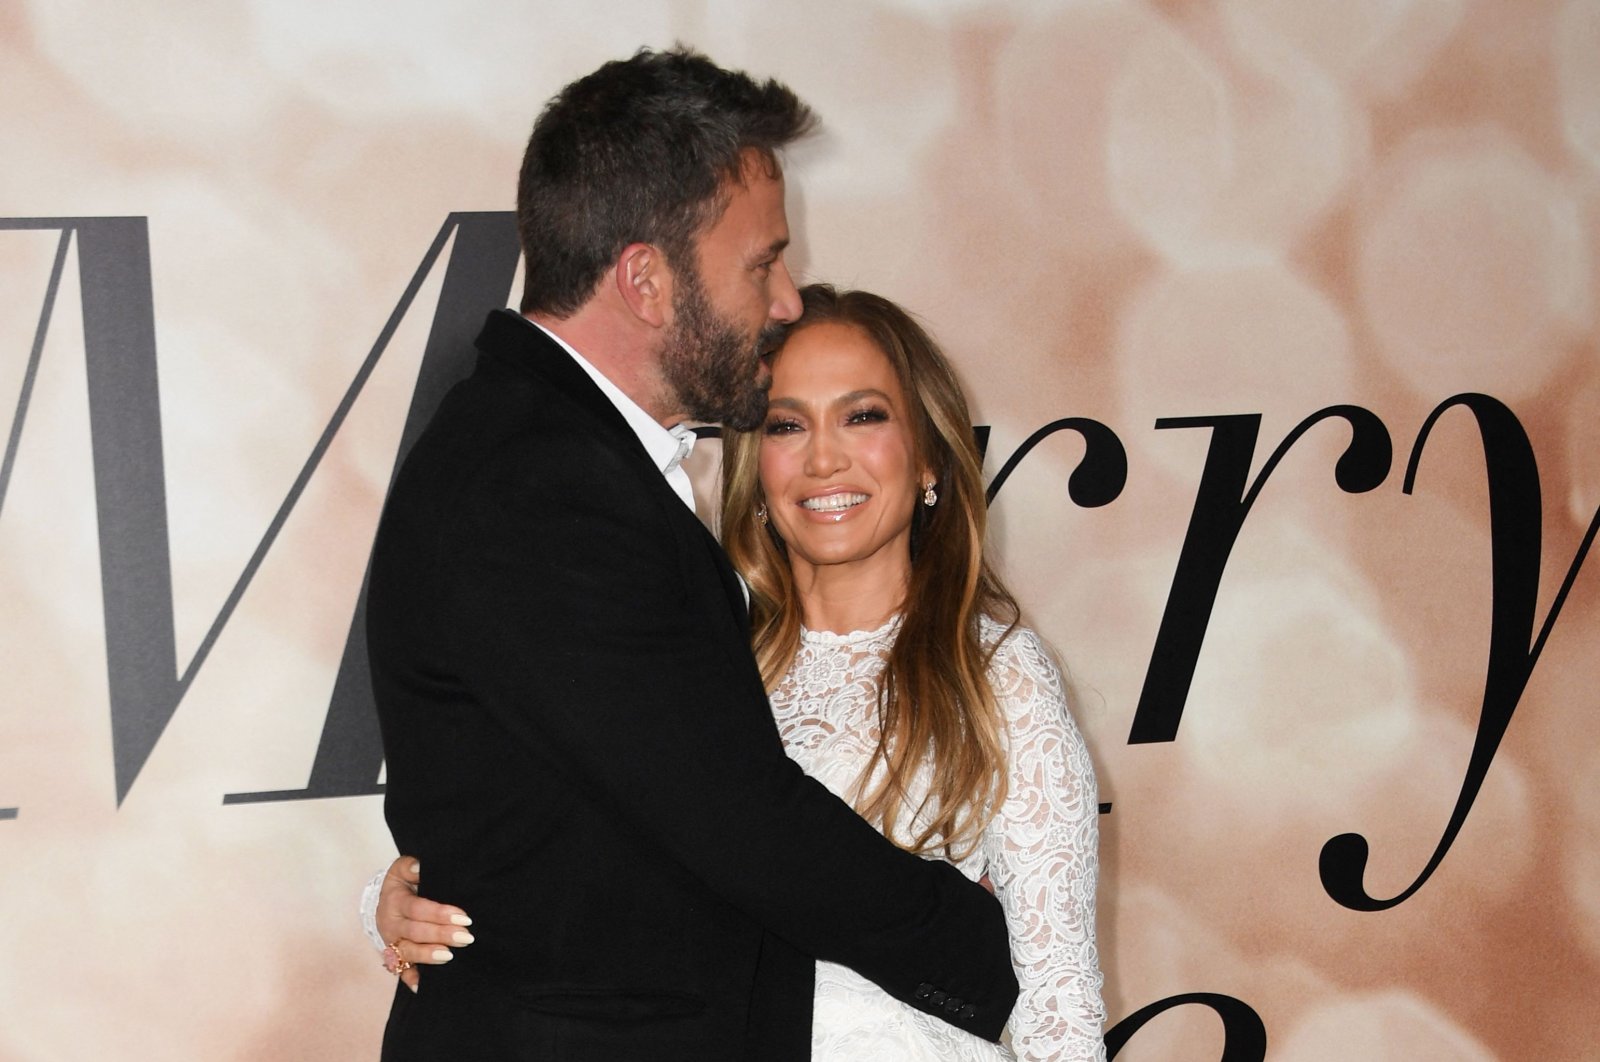 U.S. actors Jennifer Lopez (JLo) and Ben Affleck arrive for a special screening of "Marry Me" at the Directors Guild of America (DGA) in Los Angeles, U.S., Feb. 8, 2022. (AFP File Photo)